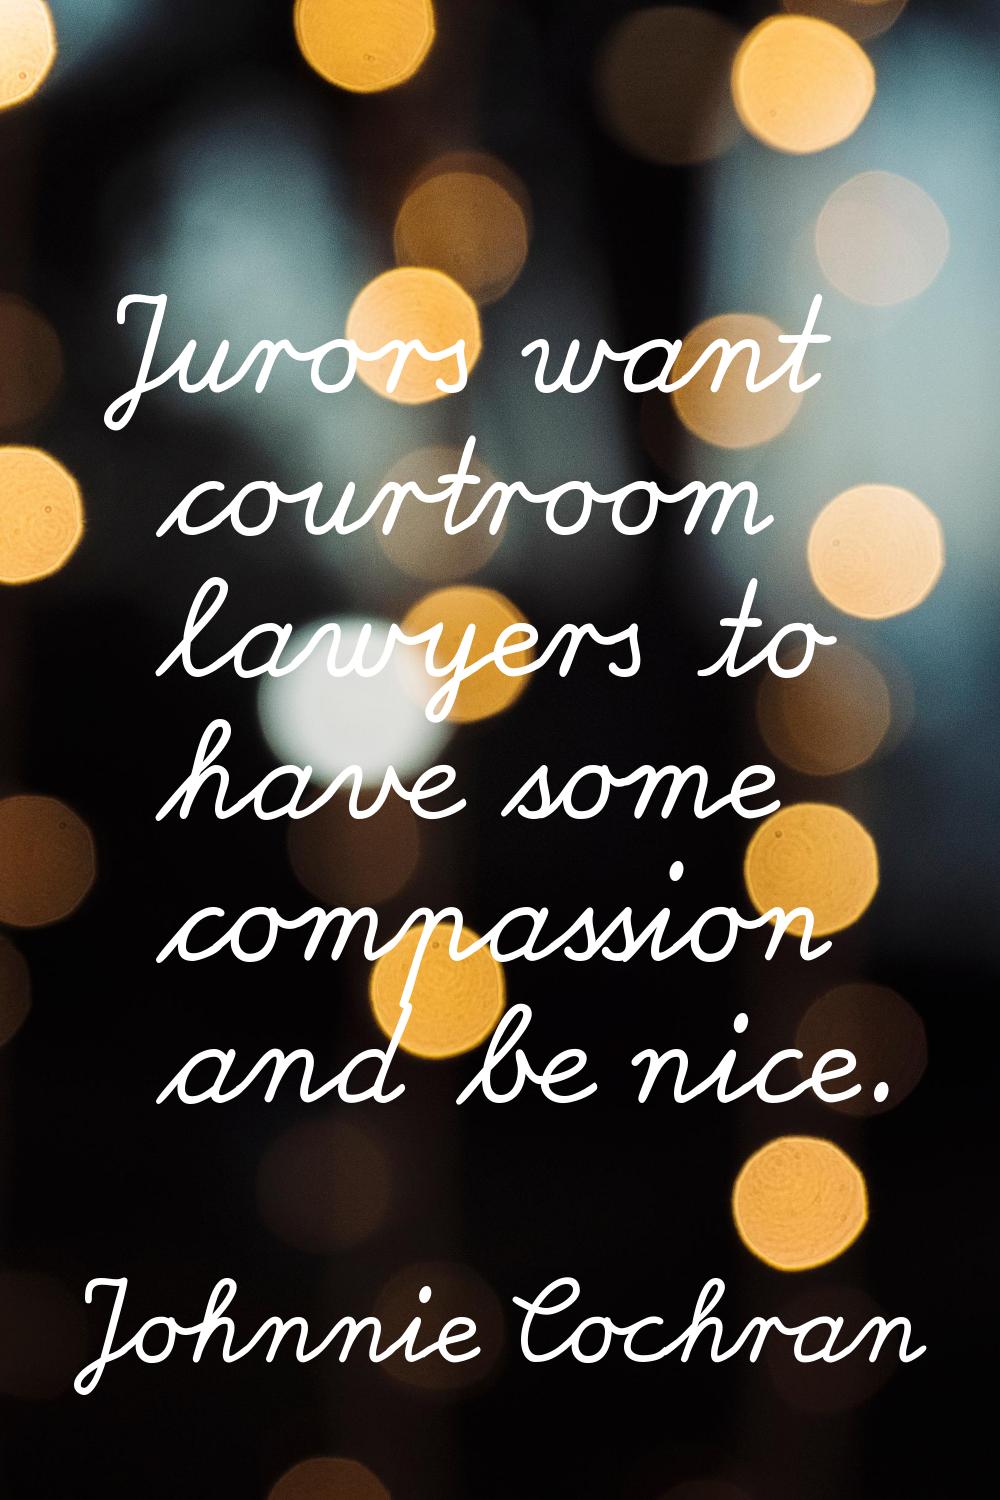 Jurors want courtroom lawyers to have some compassion and be nice.